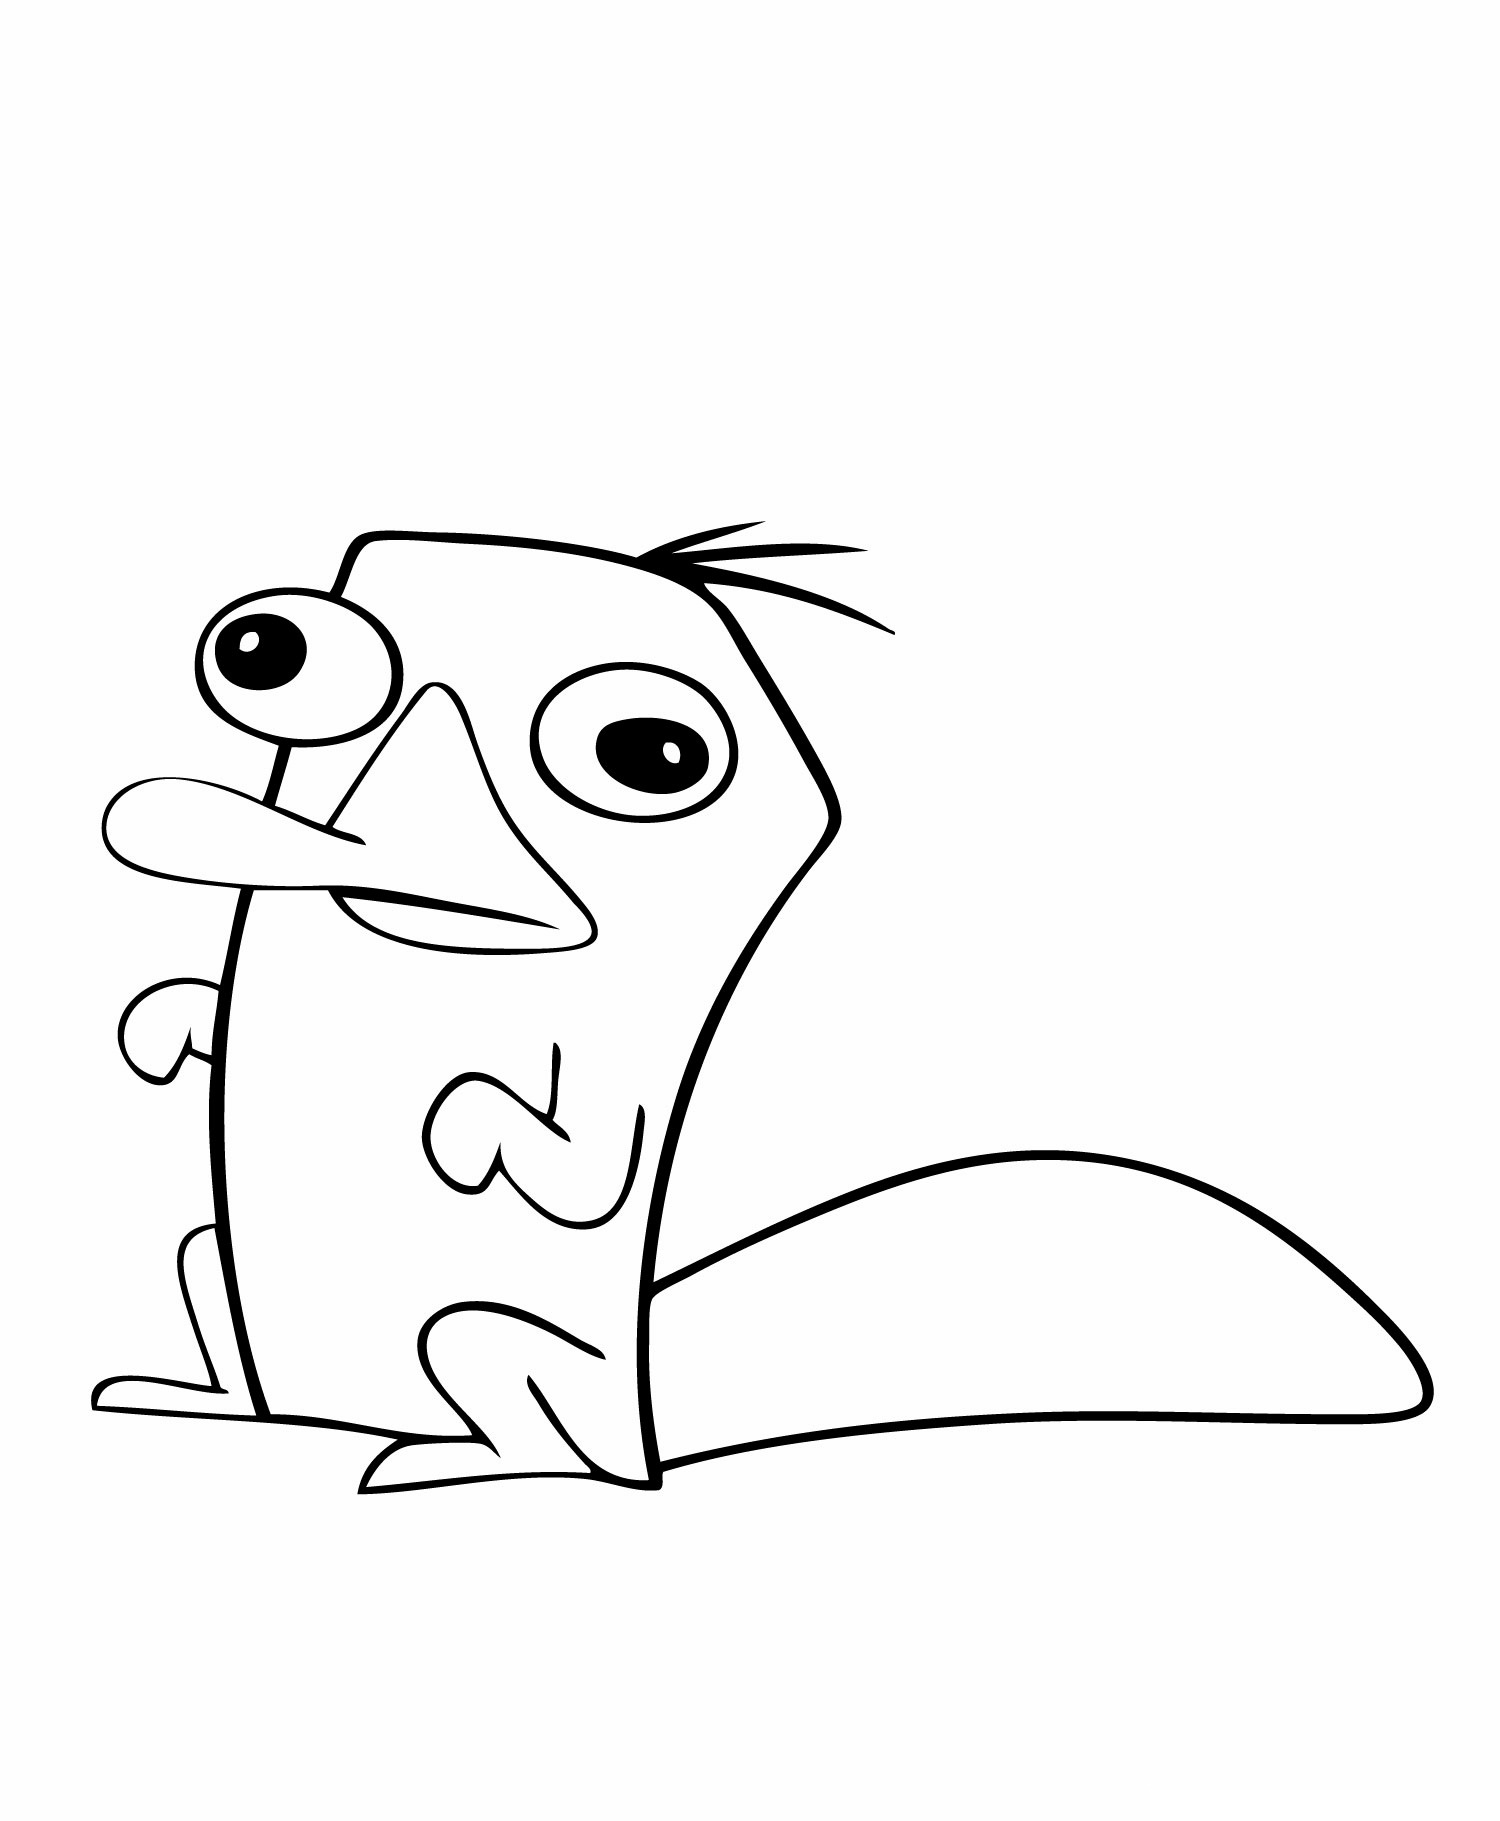 perry-the-platypus-colouring-pages-platypus-perry-drawing-coloring